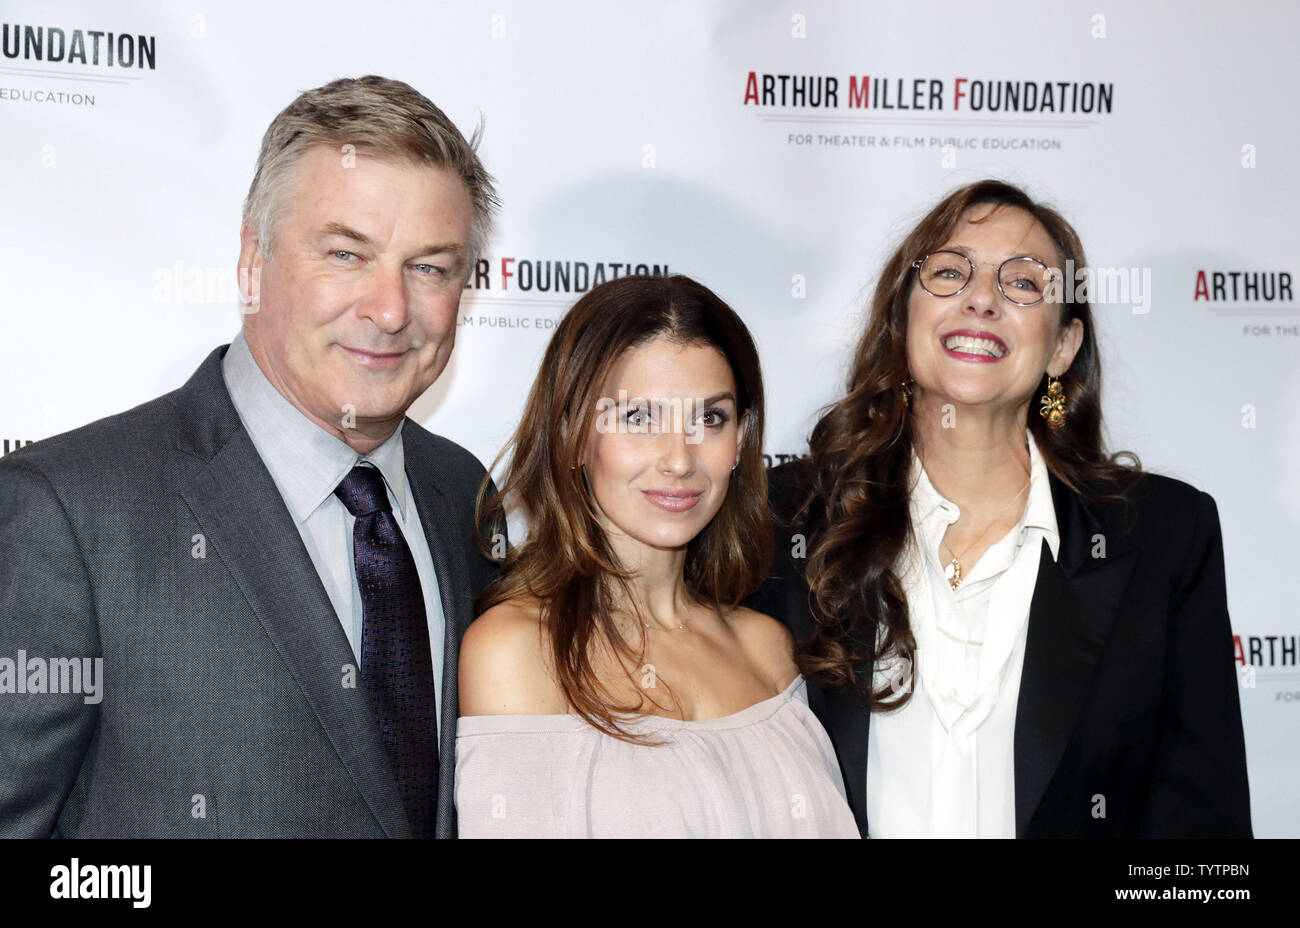 Actor Alec Baldwin (L) and wife Hilaria Baldwin and Rebecca Miller (Chair - Arthur Miller Foundation) arrive on the red carpet at the Arthur Miller Foundation Honors at City Winery in New York City on October 22, 2018. The Arthur Miller Foundation's inaugural Arthur Miller Foundation Honors celebrating the power of public school arts education was hosted by Alec Baldwin.  Photo by Jason Szenes/UPI Stock Photo